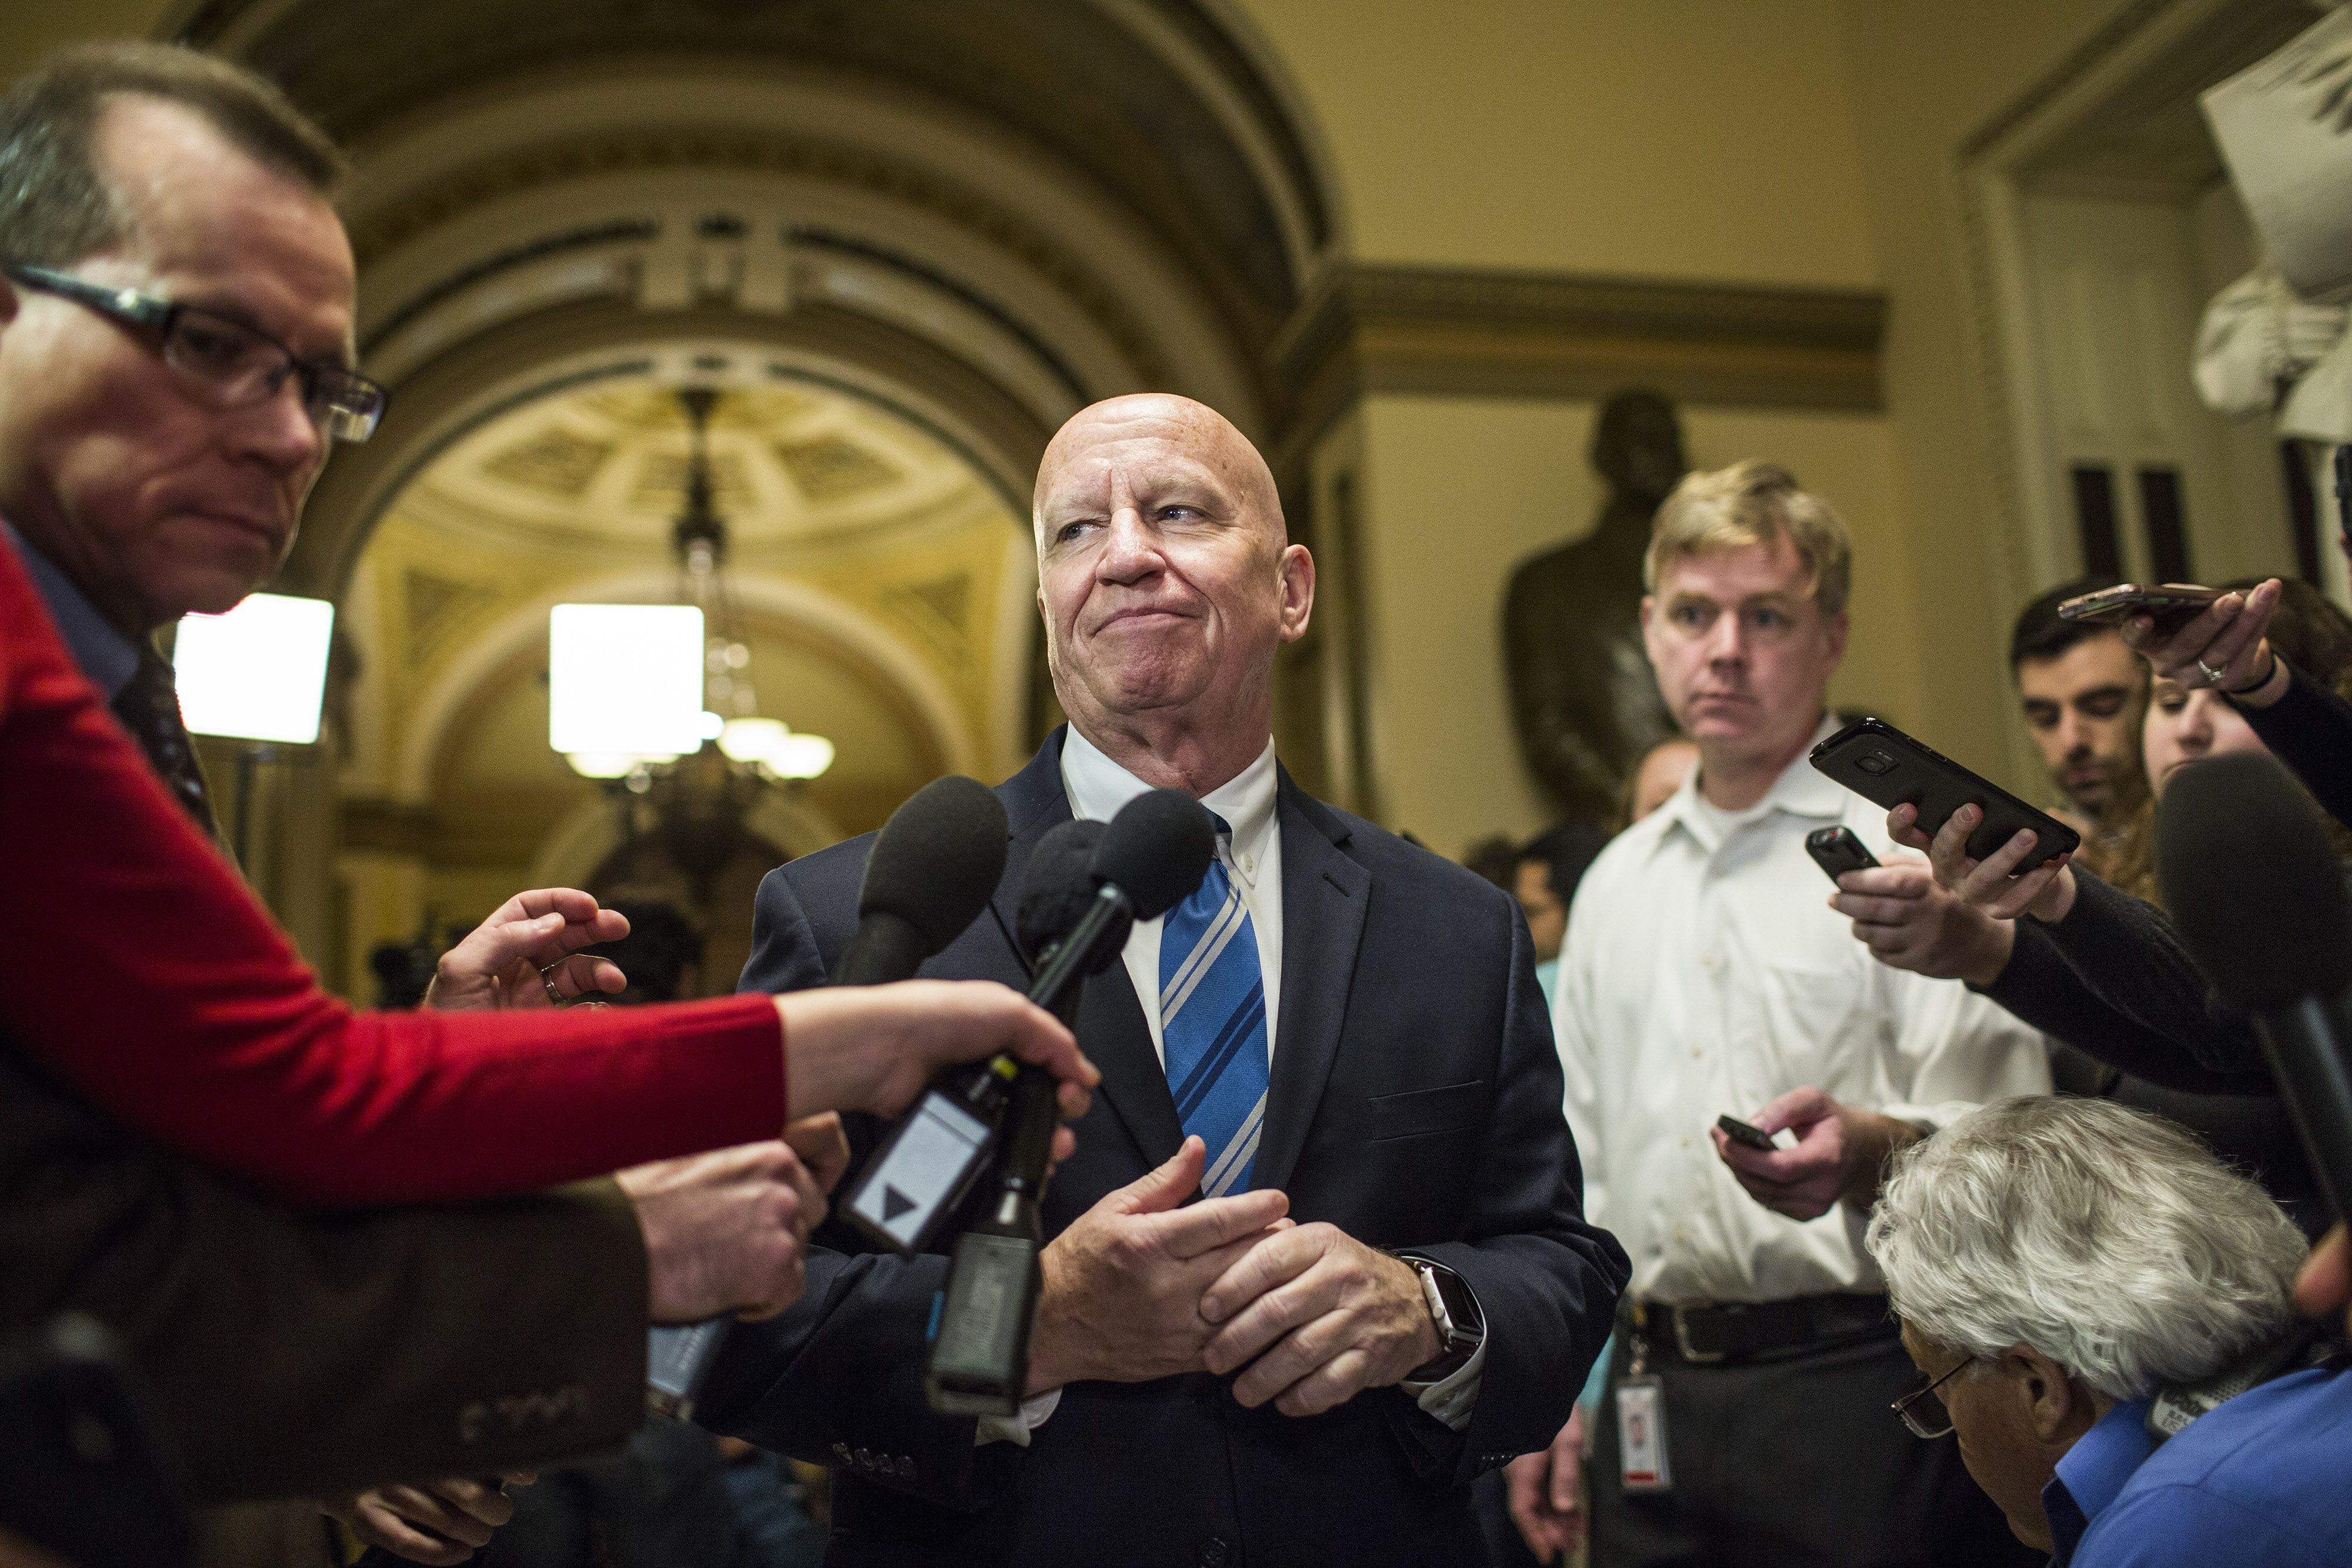 Representative Kevin Brady, a Republican from Texas and chairman of the House Ways and Means Committee, speaks to members of the media after a meeting on tax legislation at the U.S. Capitol in Washington, D.C., U.S., on Friday, Dec. 15, 2017. (Bloomberg—Bloomberg via Getty Images)